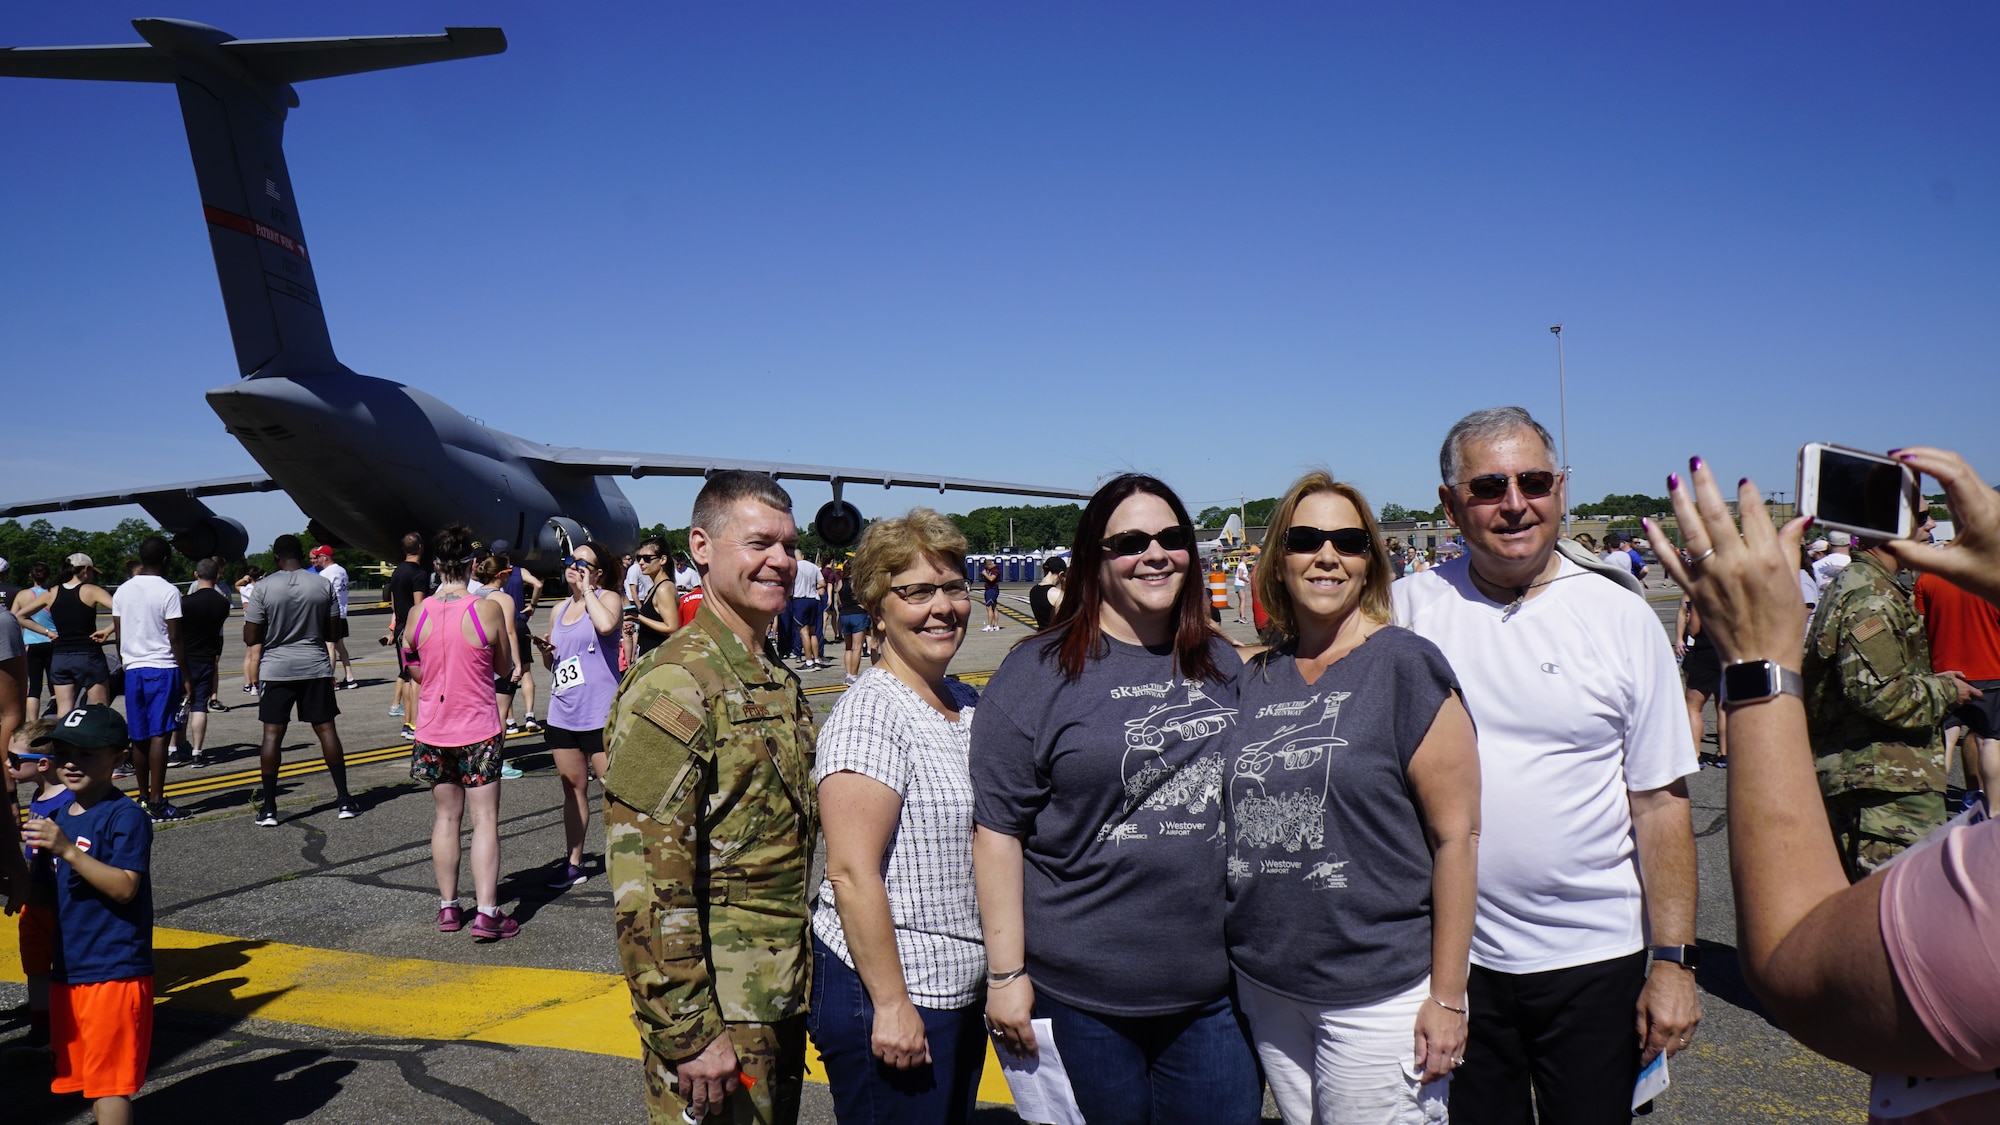 Run the Runway event takes off at Westover